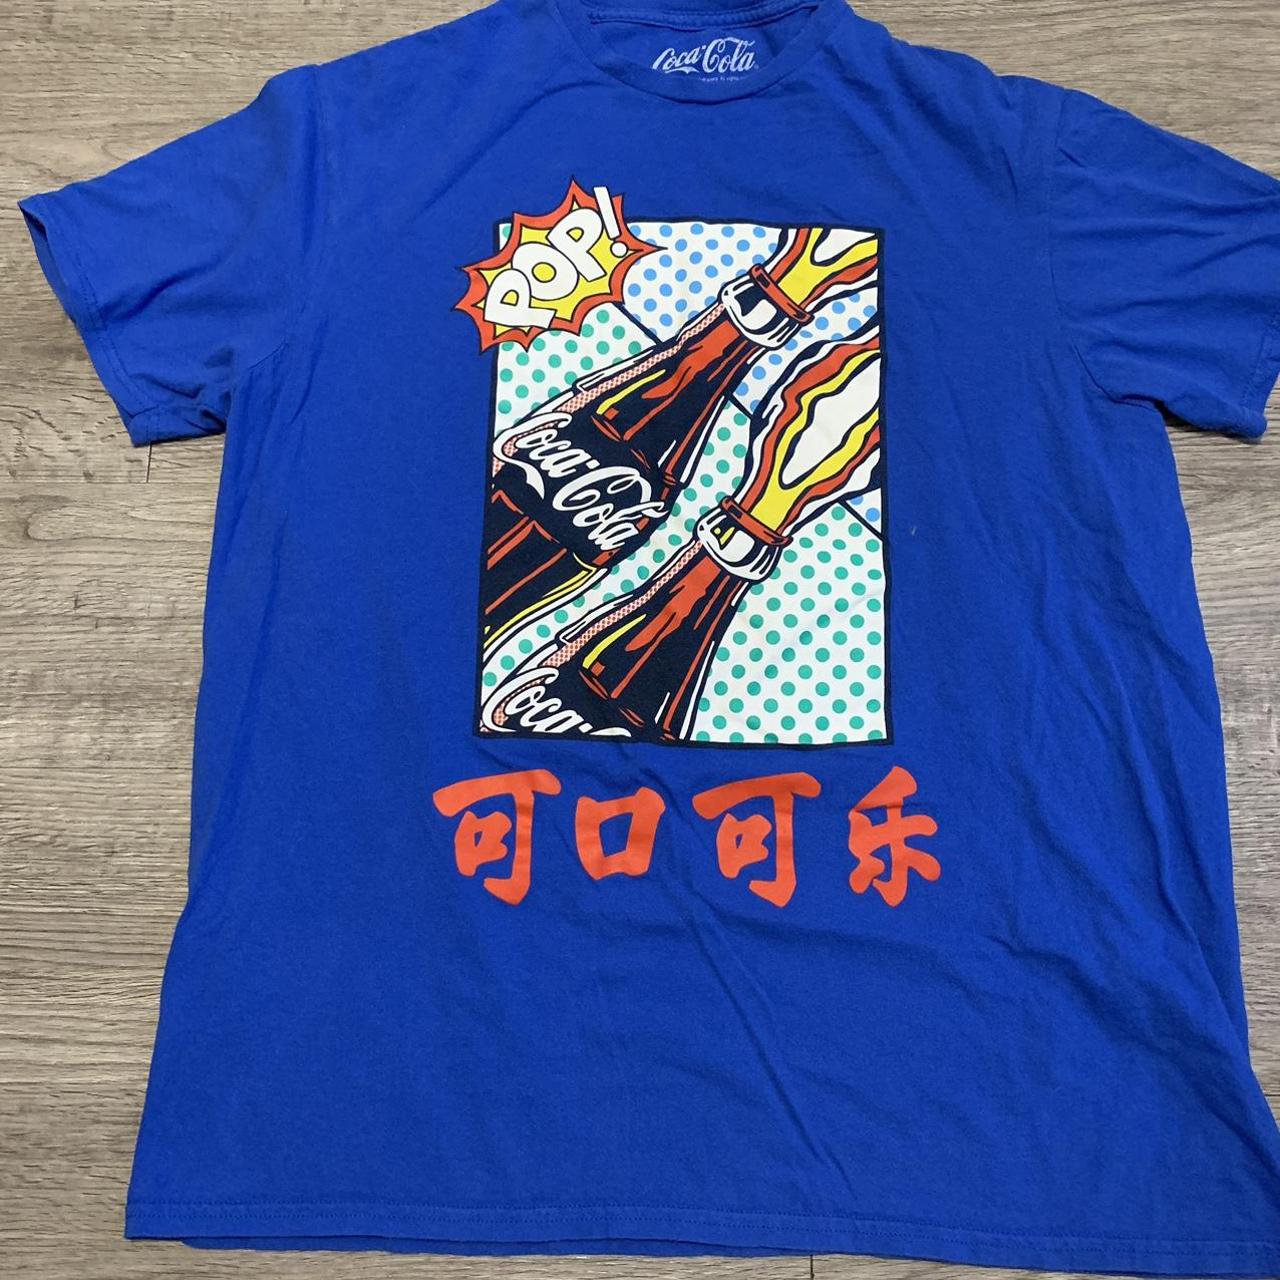 item listed by poboystreetwear